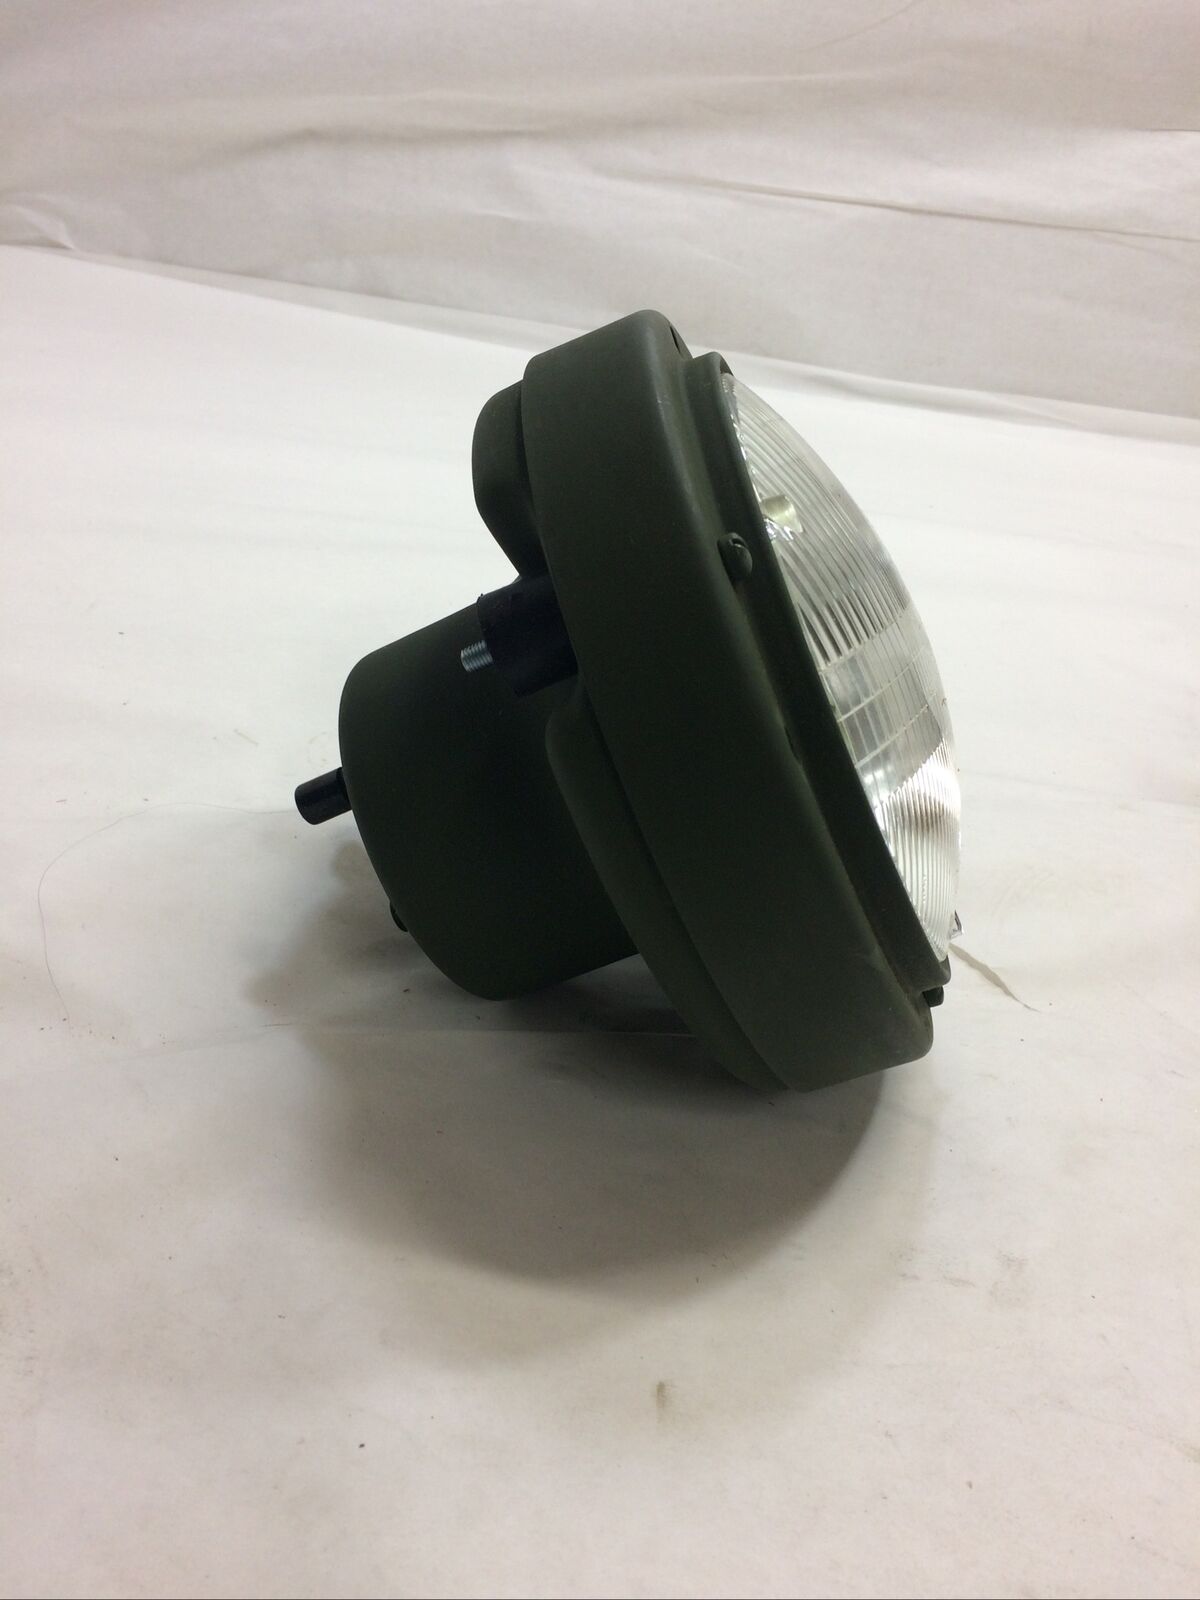 New OEM Jeep Willy Military Headlight Assembly Green 19207 5A910 12338611